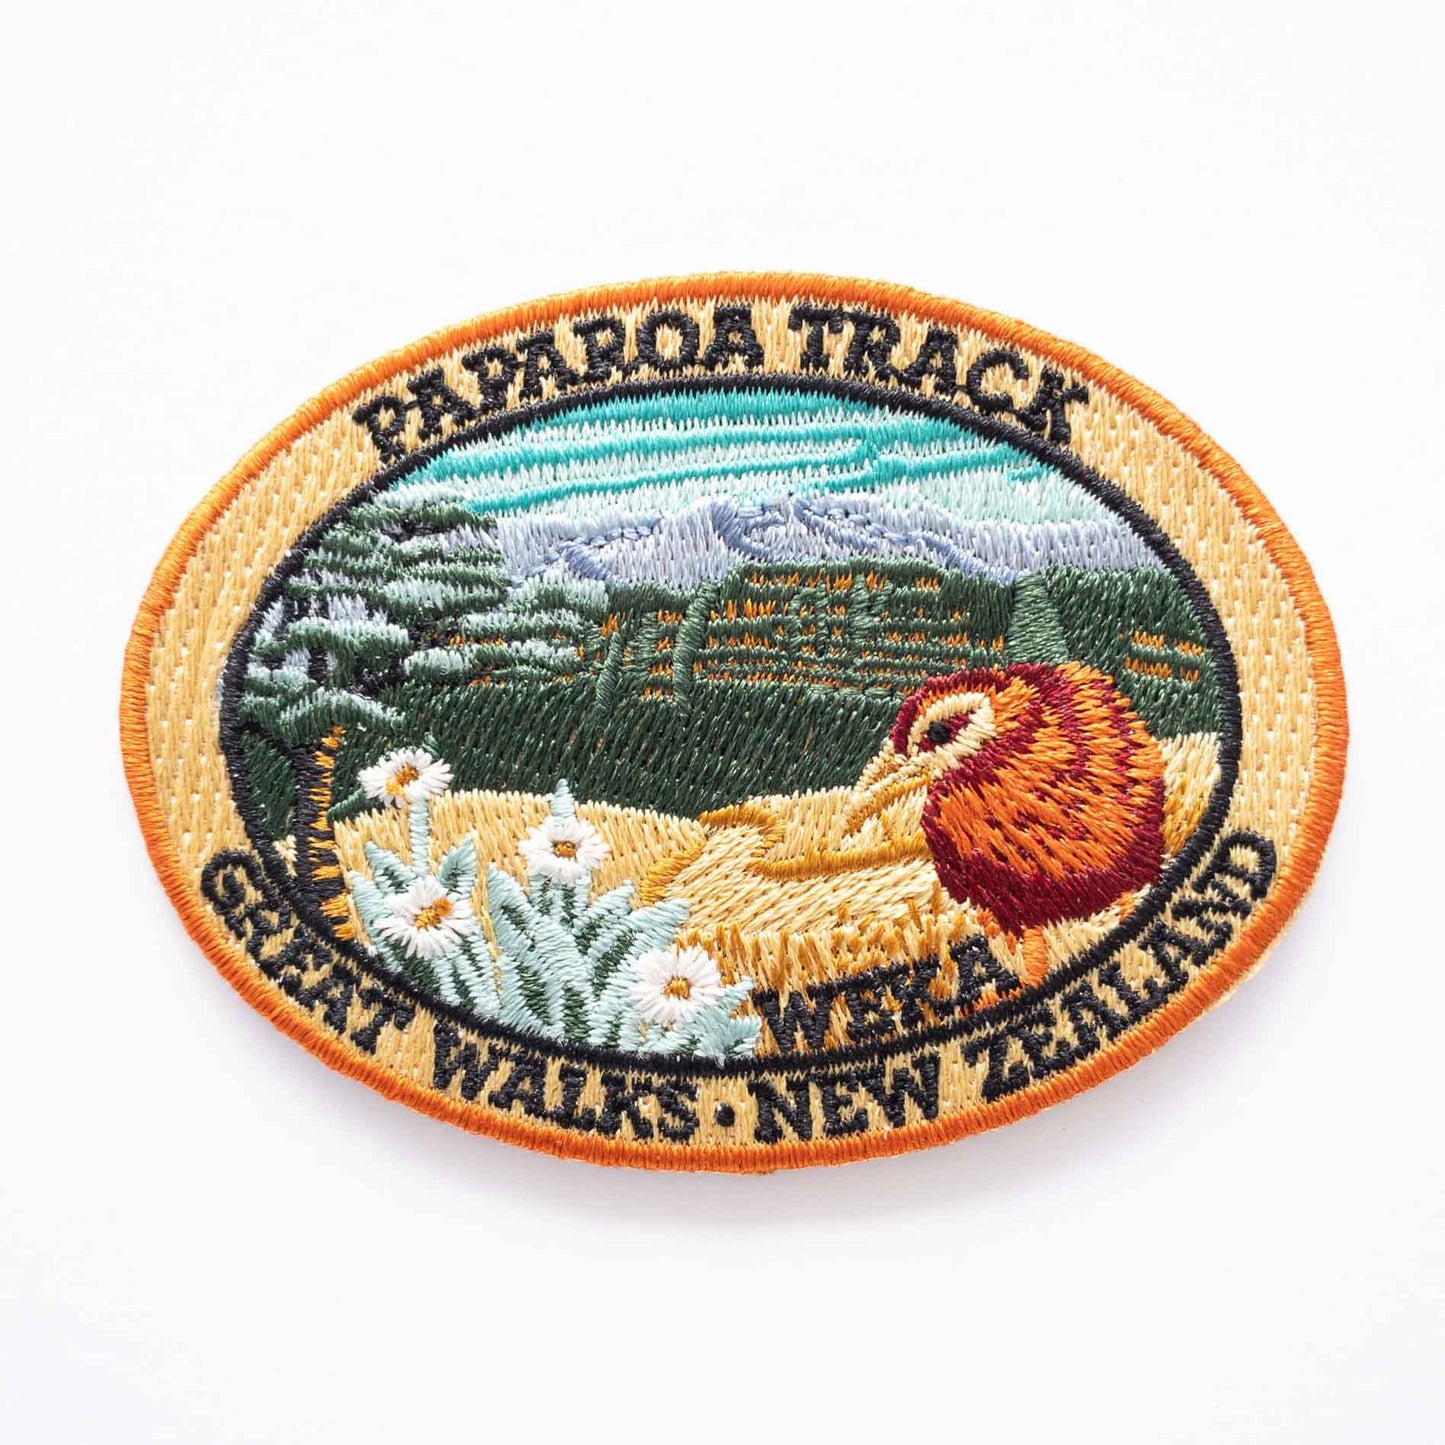 Oval, embroidered Paparoa Track patch, with a weka, green hills, mountain daisy and tussock.